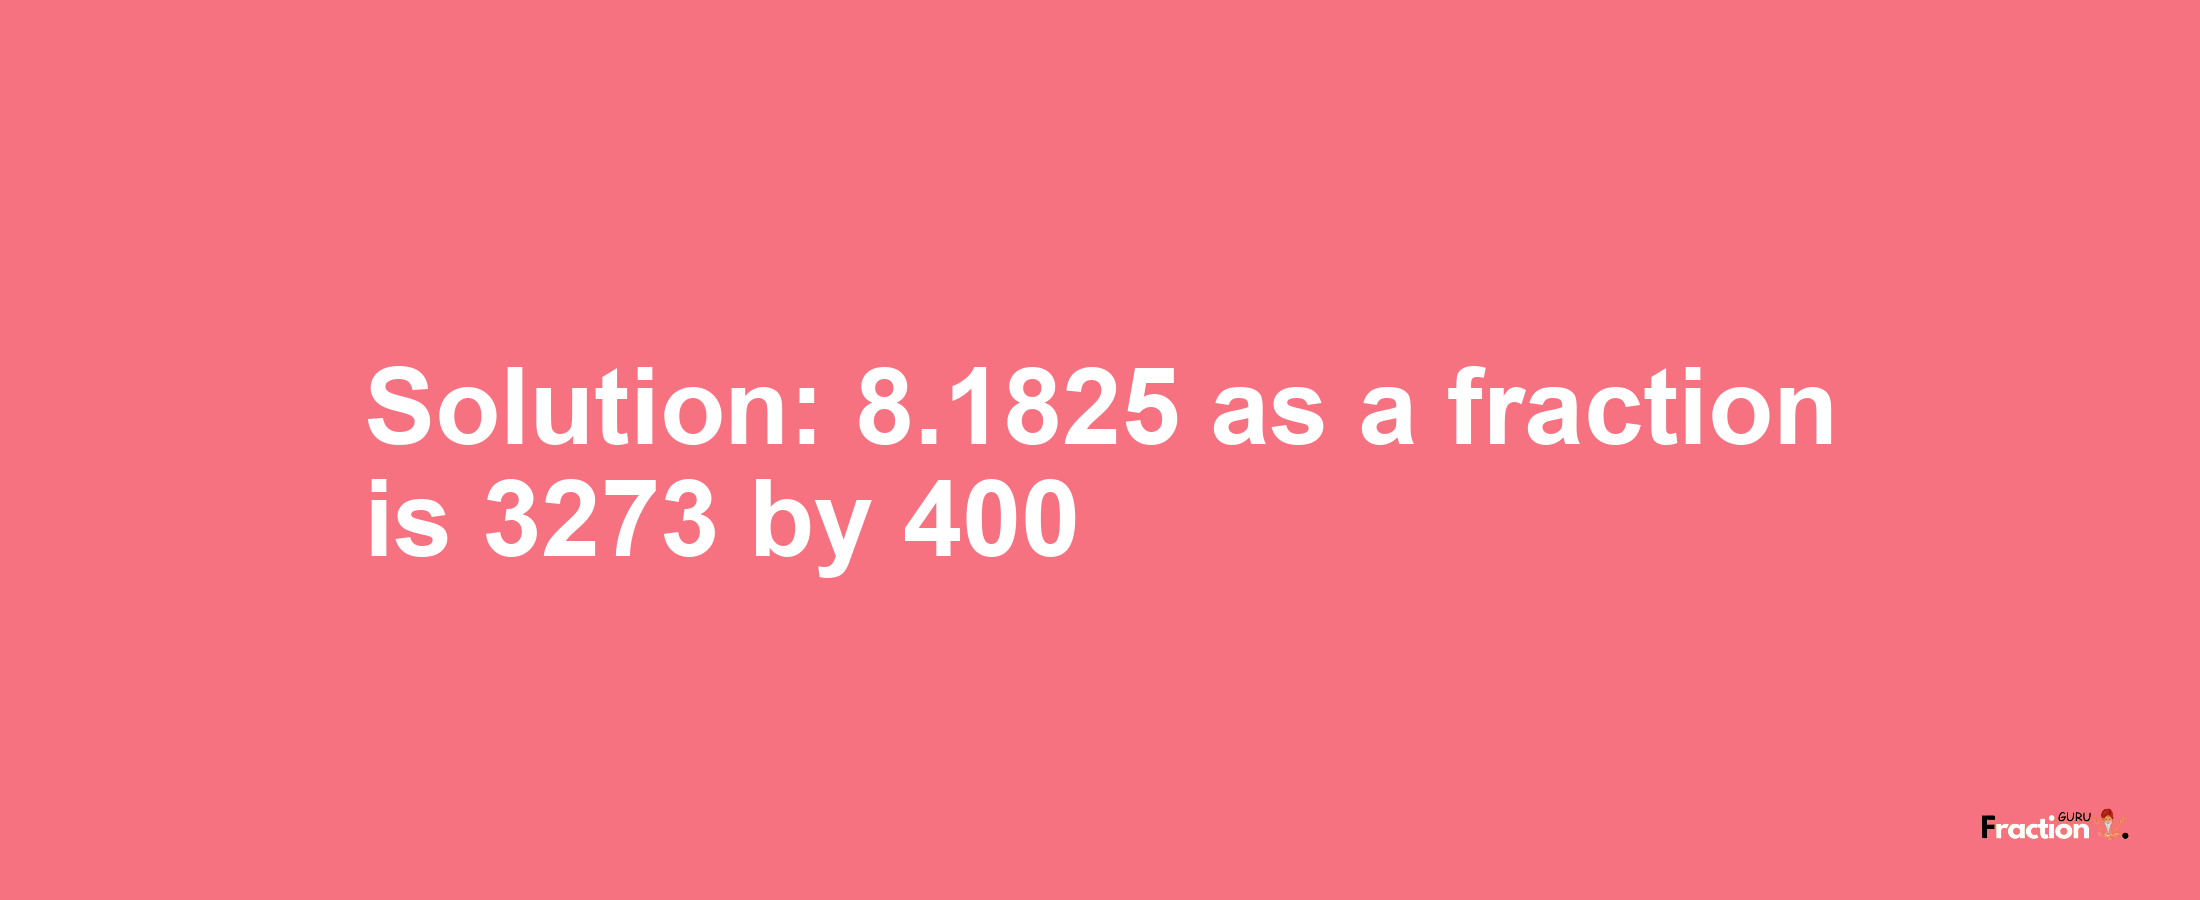 Solution:8.1825 as a fraction is 3273/400